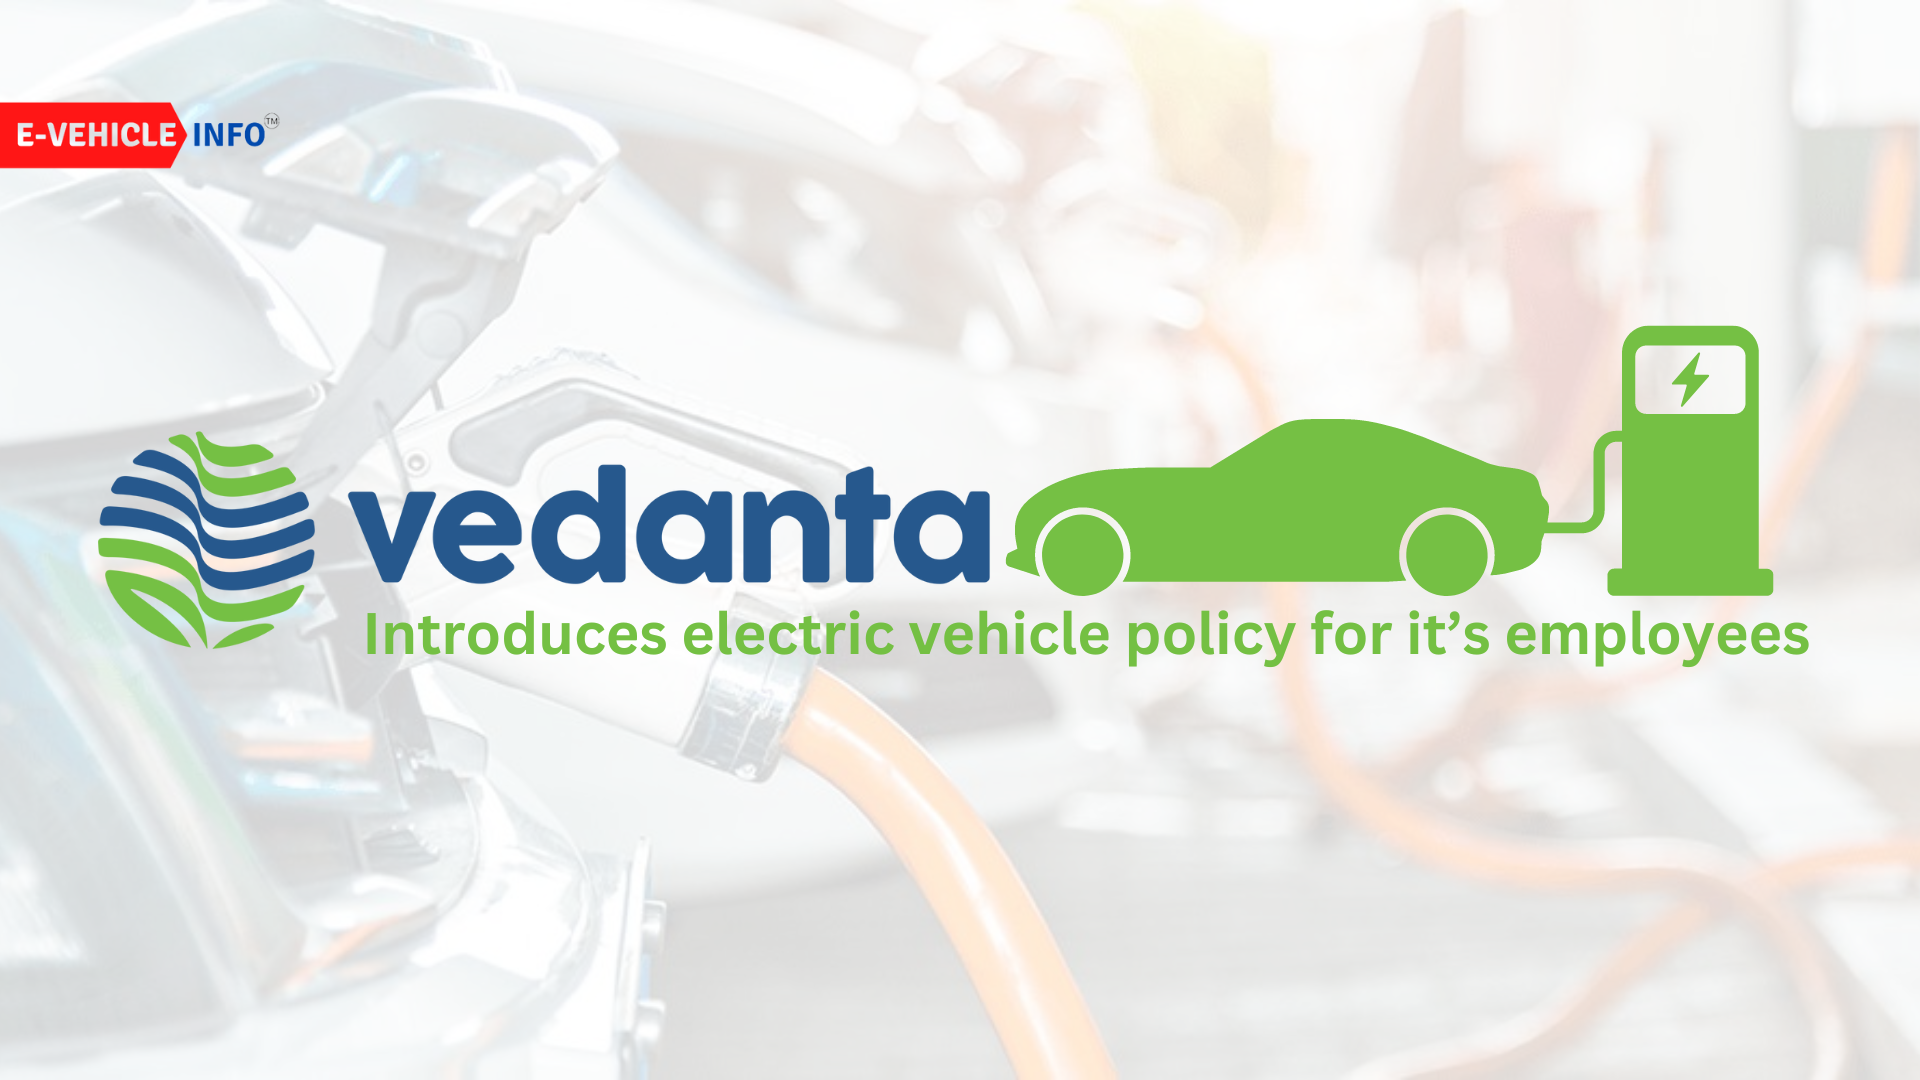 https://e-vehicleinfo.com/vedanta-introduces-electric-vehicle-policy-for-its-employees/